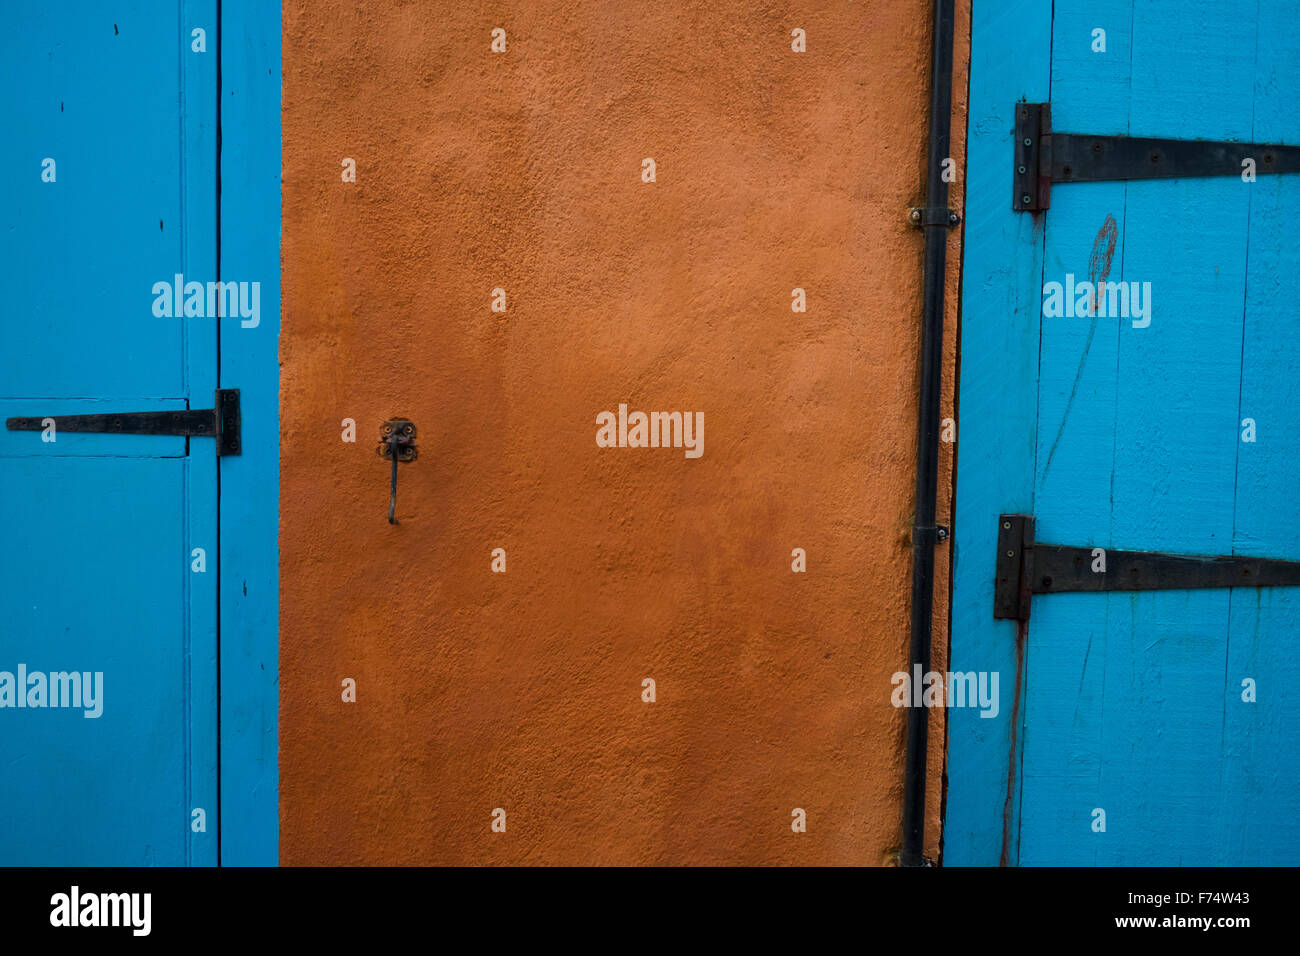 Pair of blue doors with black metal hinges against a burnt orange background - Falmouth, Cornwall. Stock Photo